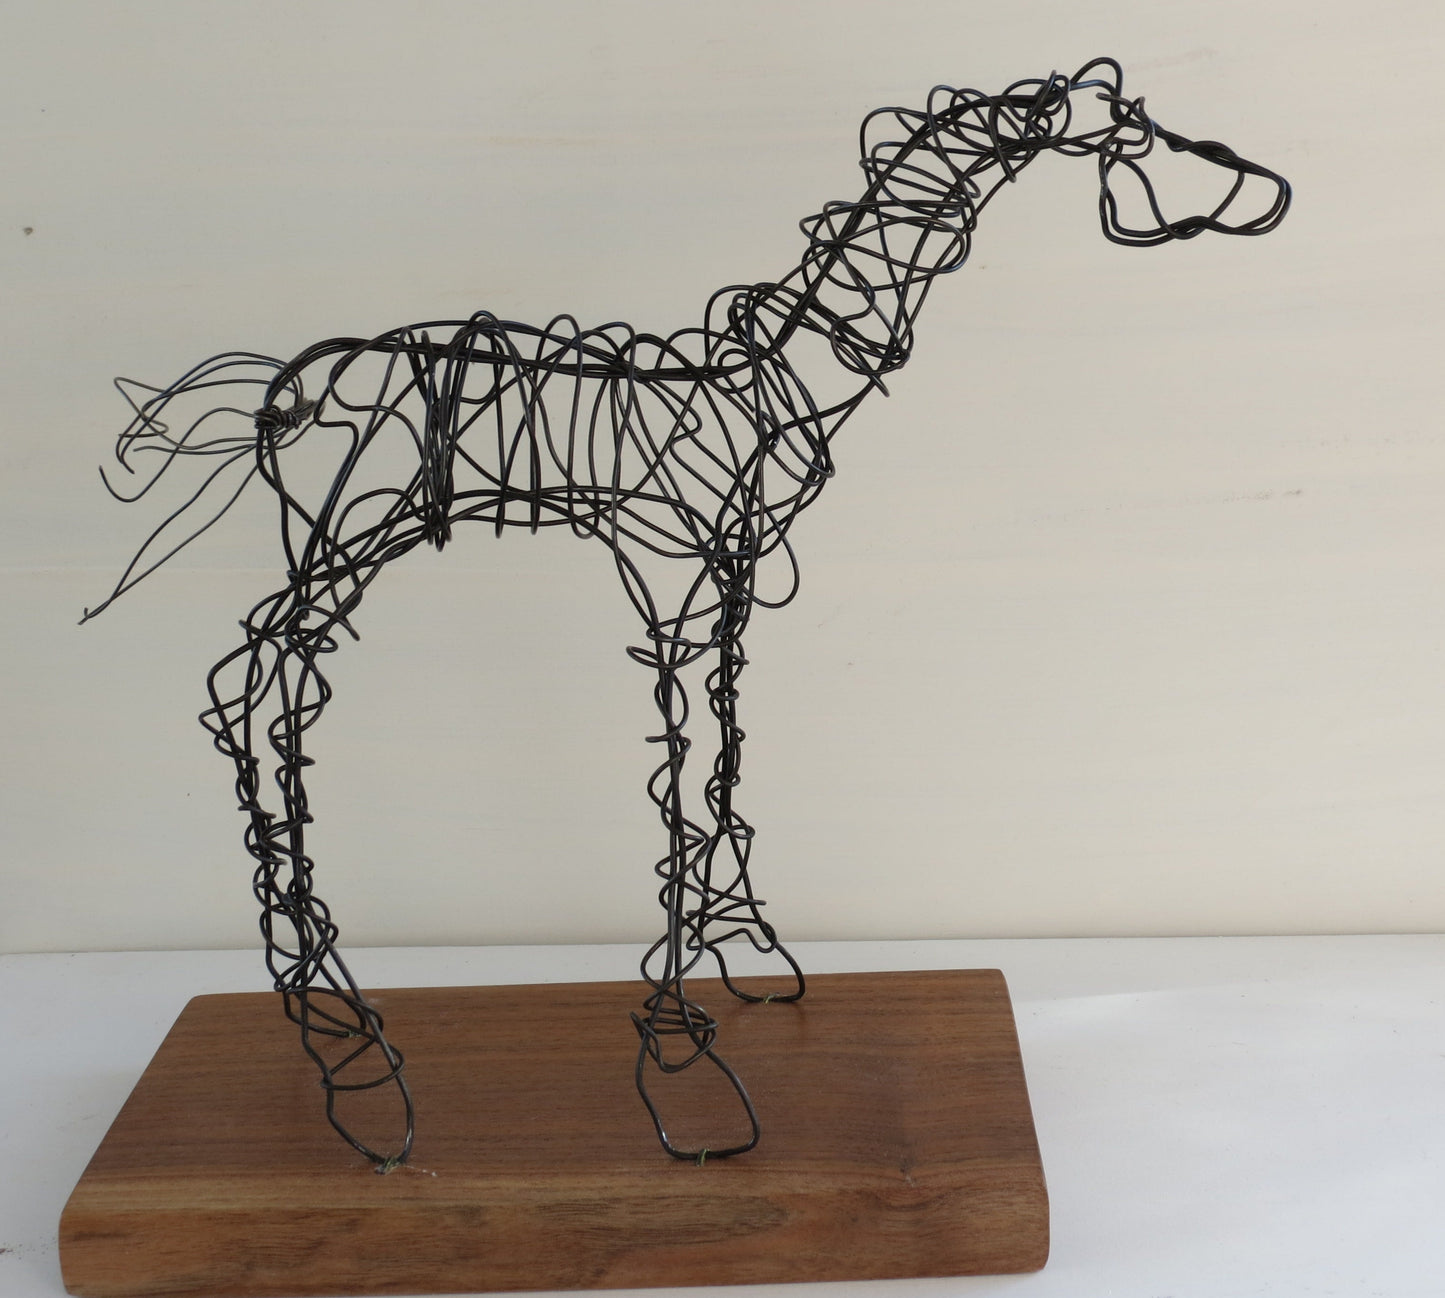 Hay baling wire bend and sculpted into a wire horse statue. On a walnut base